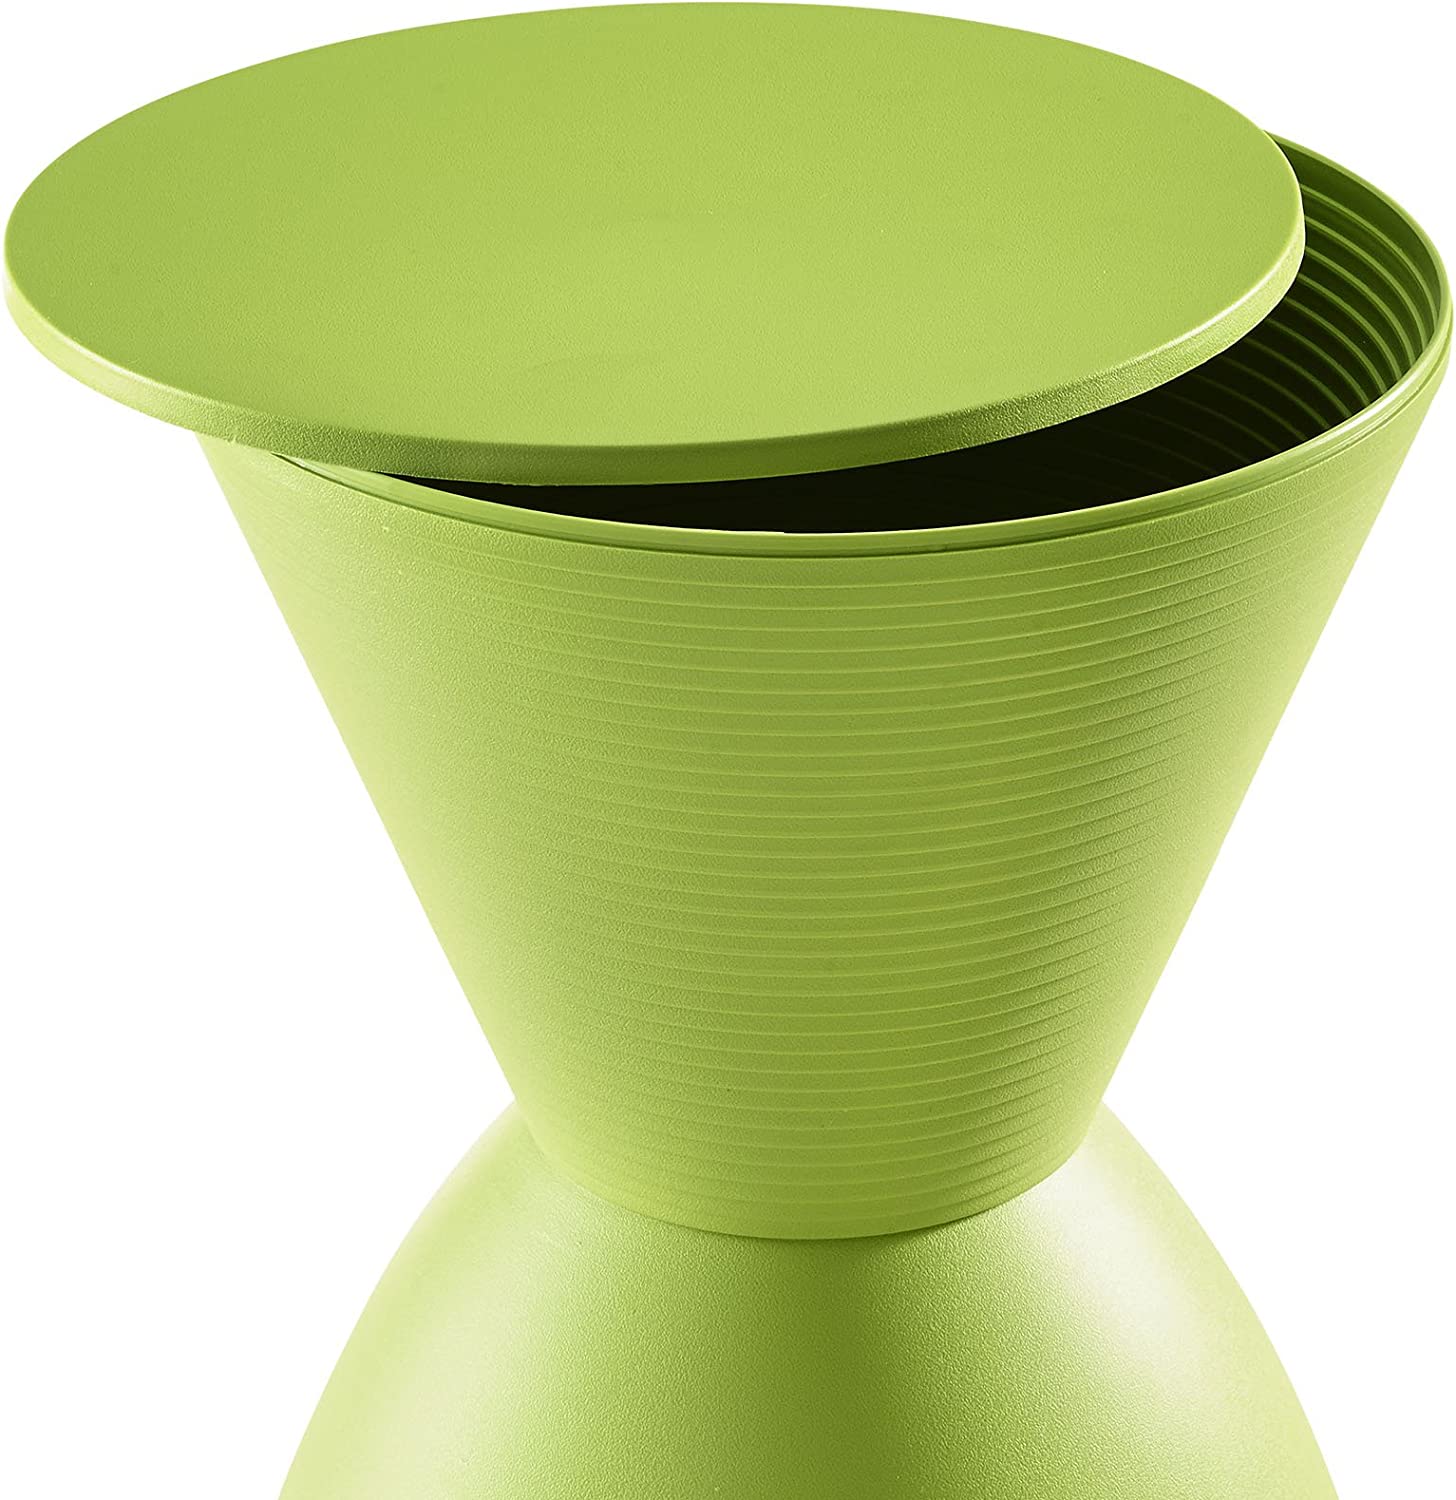 Modway Haste Contemporary Modern Hourglass Accent Stool in Green